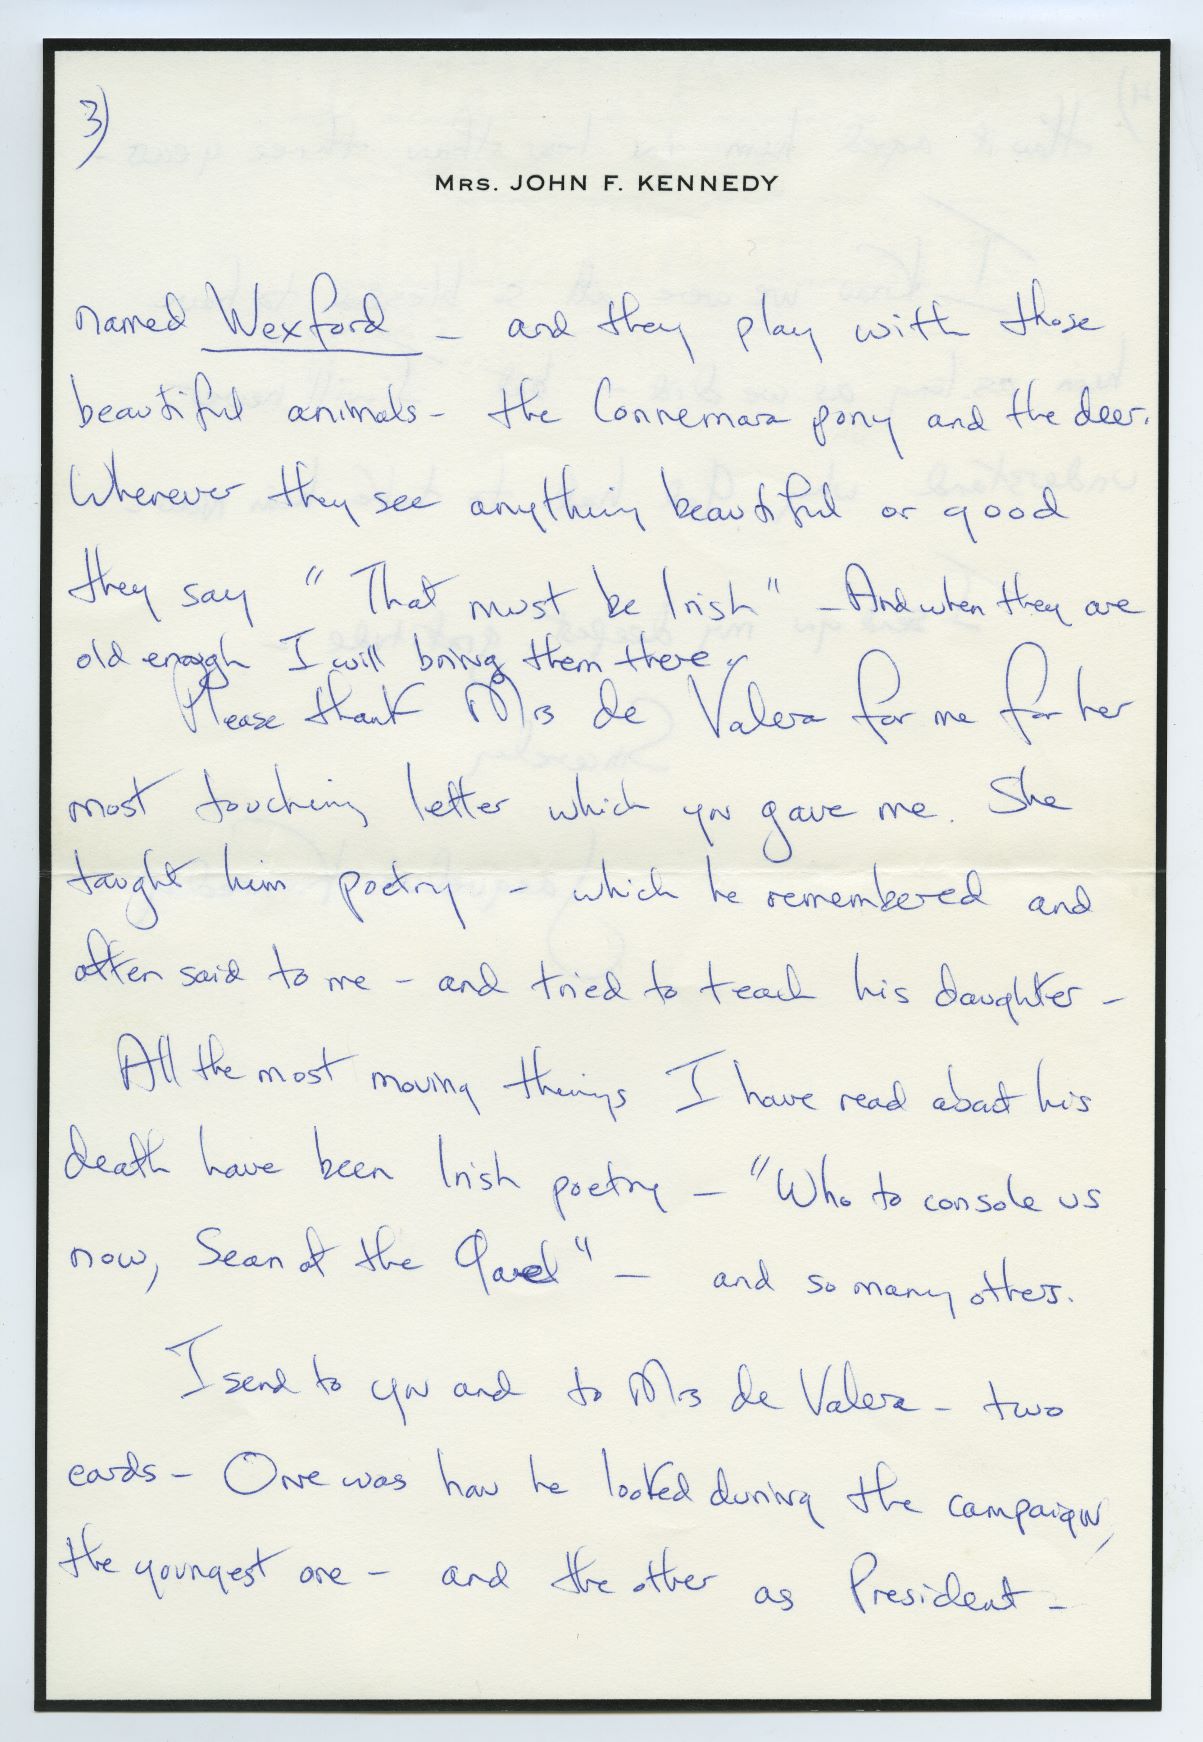 Page three of Jacqueline Kennedy's letter to President of Ireland Eamon de Valera six weeks after the assassination of her husband, President John F. Kennedy. This handwritten letter is featured in 'The Presidents' Letters: An Unexpected History of Ireland' by Flor MacCarthy and is reproduced with kind permission of UCD-OFM Partnership.